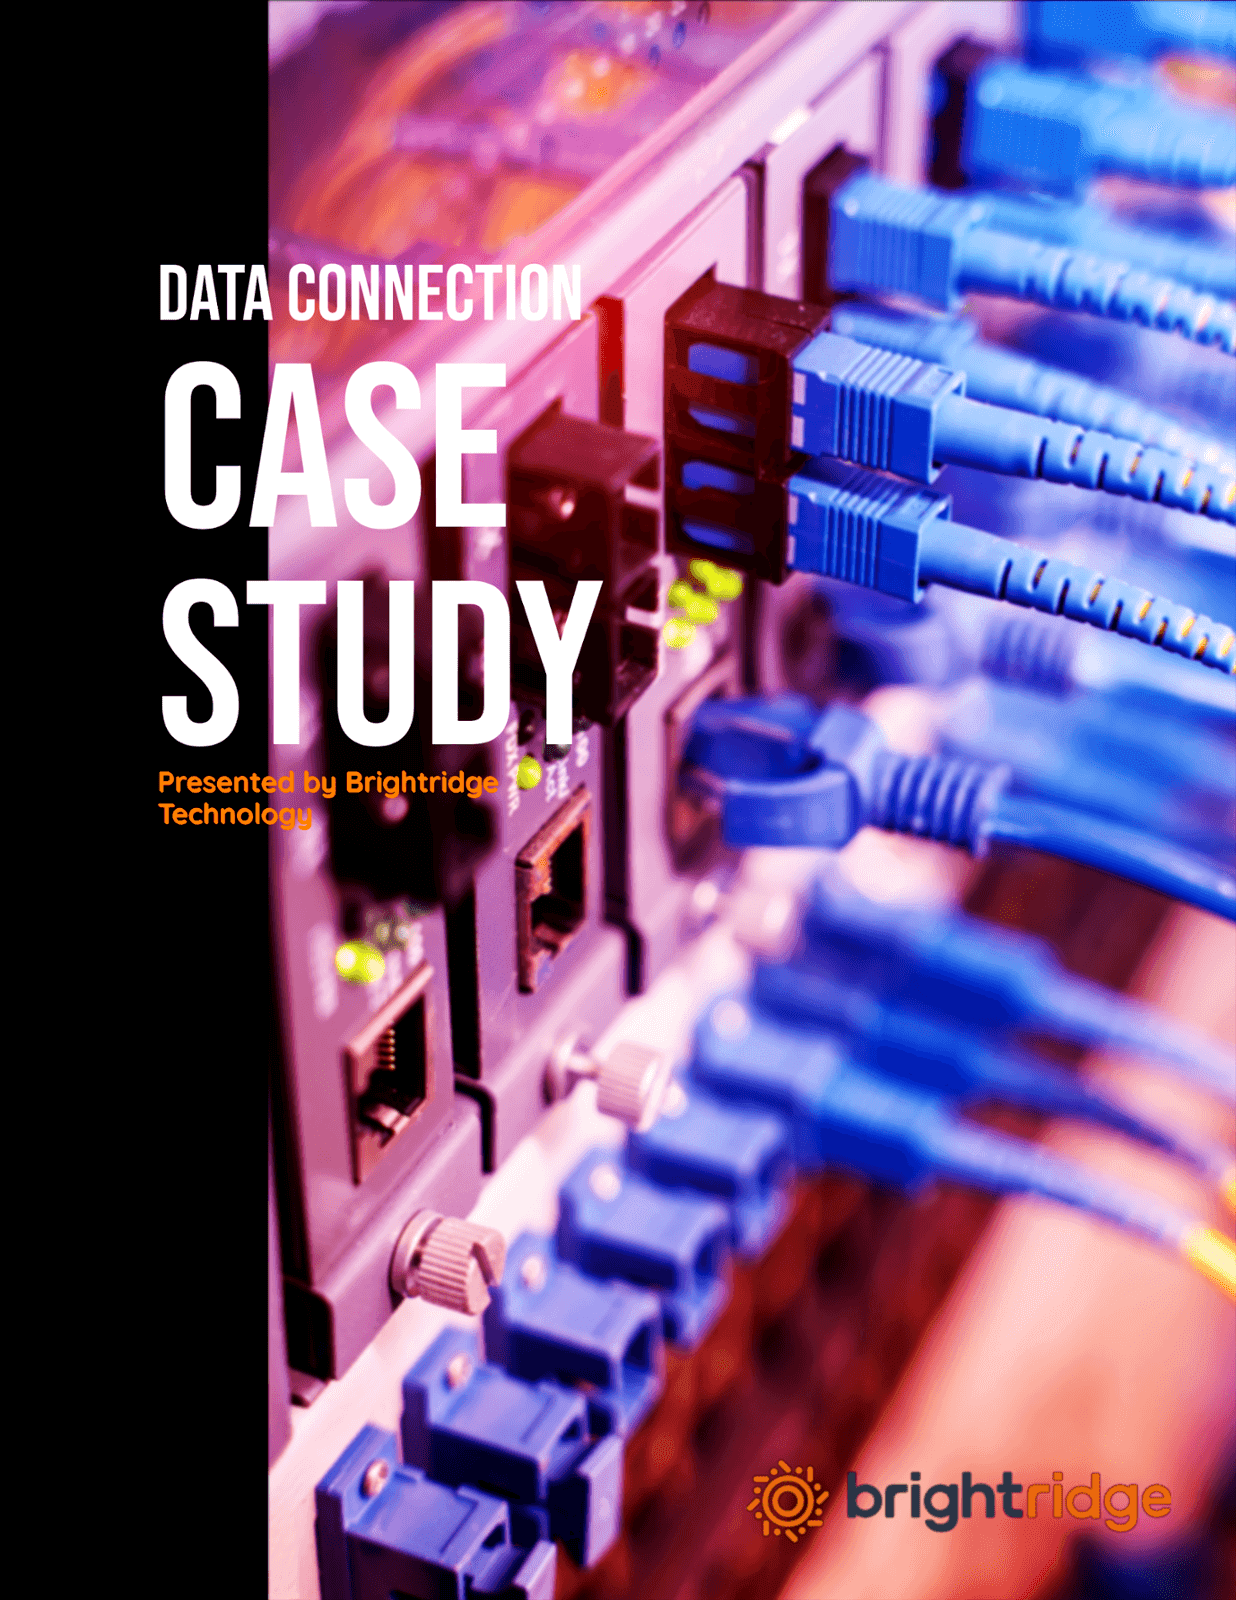 Data Connection Case Study